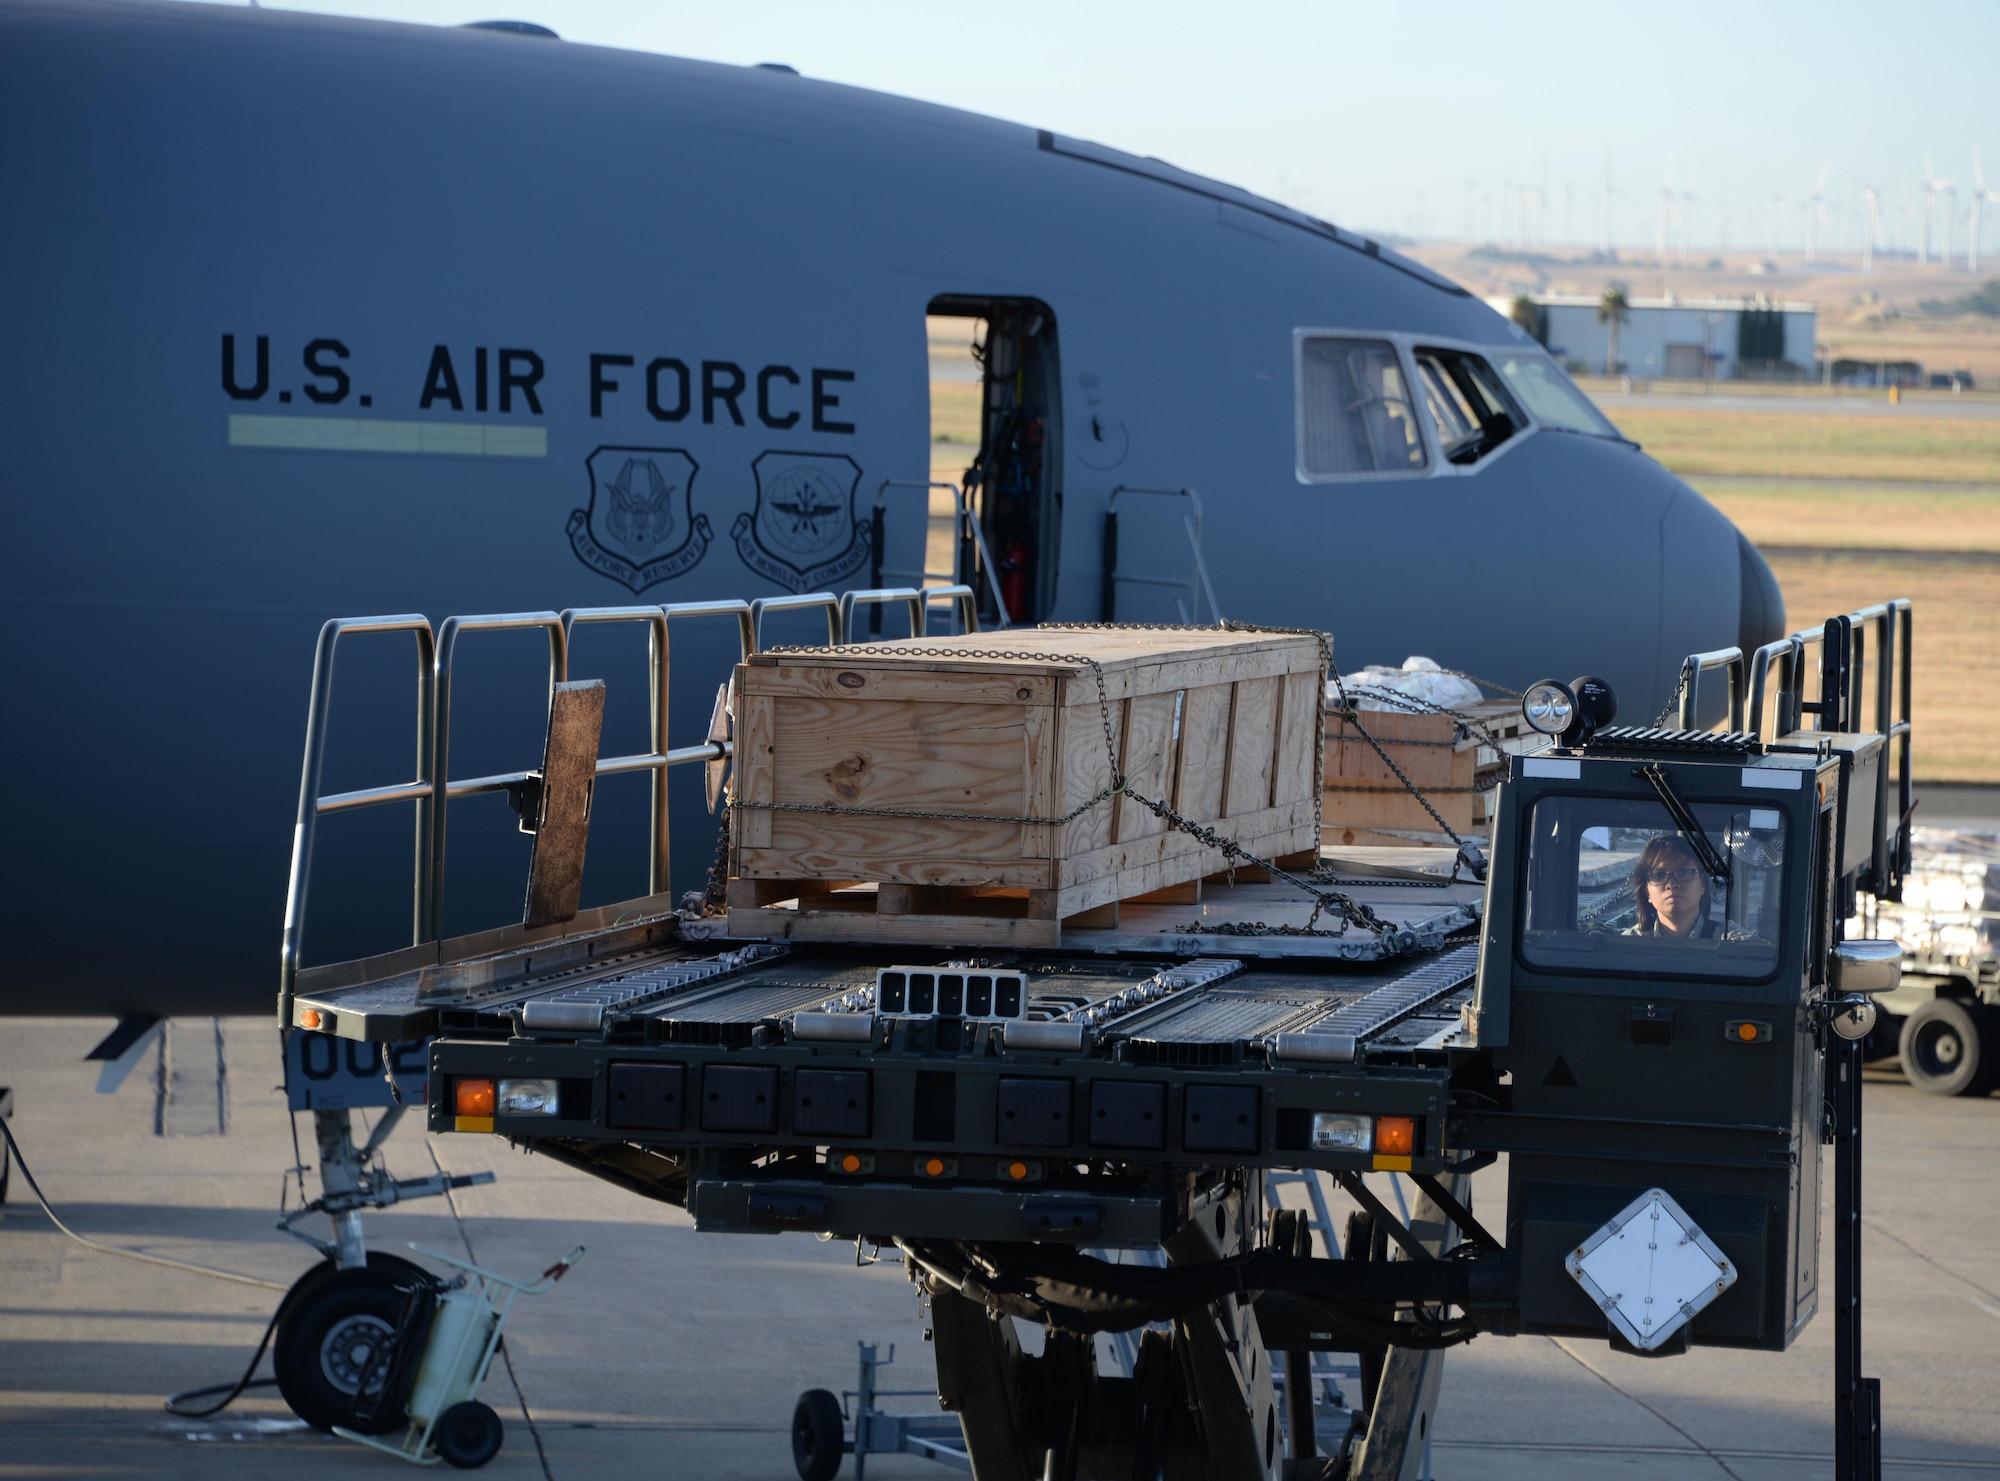 Airman 1st Class Jammie Lueck, 60th Aerial Port Squadron, positions a K-Loader prior to loading cargo onto a KC-10 Extender at Travis Air Force Base, Calif., June 17, 2017. Lueck helped load more than 15,000 pounds of cargo onto the aircraft prior to a flight to Joint Base Pearl Harbor-Hickam, Hawaii. The KC-10 is capable of transporting 170,000 pounds of cargo. (U.S. Air Force photo by Tech. Sgt. James Hodgman)